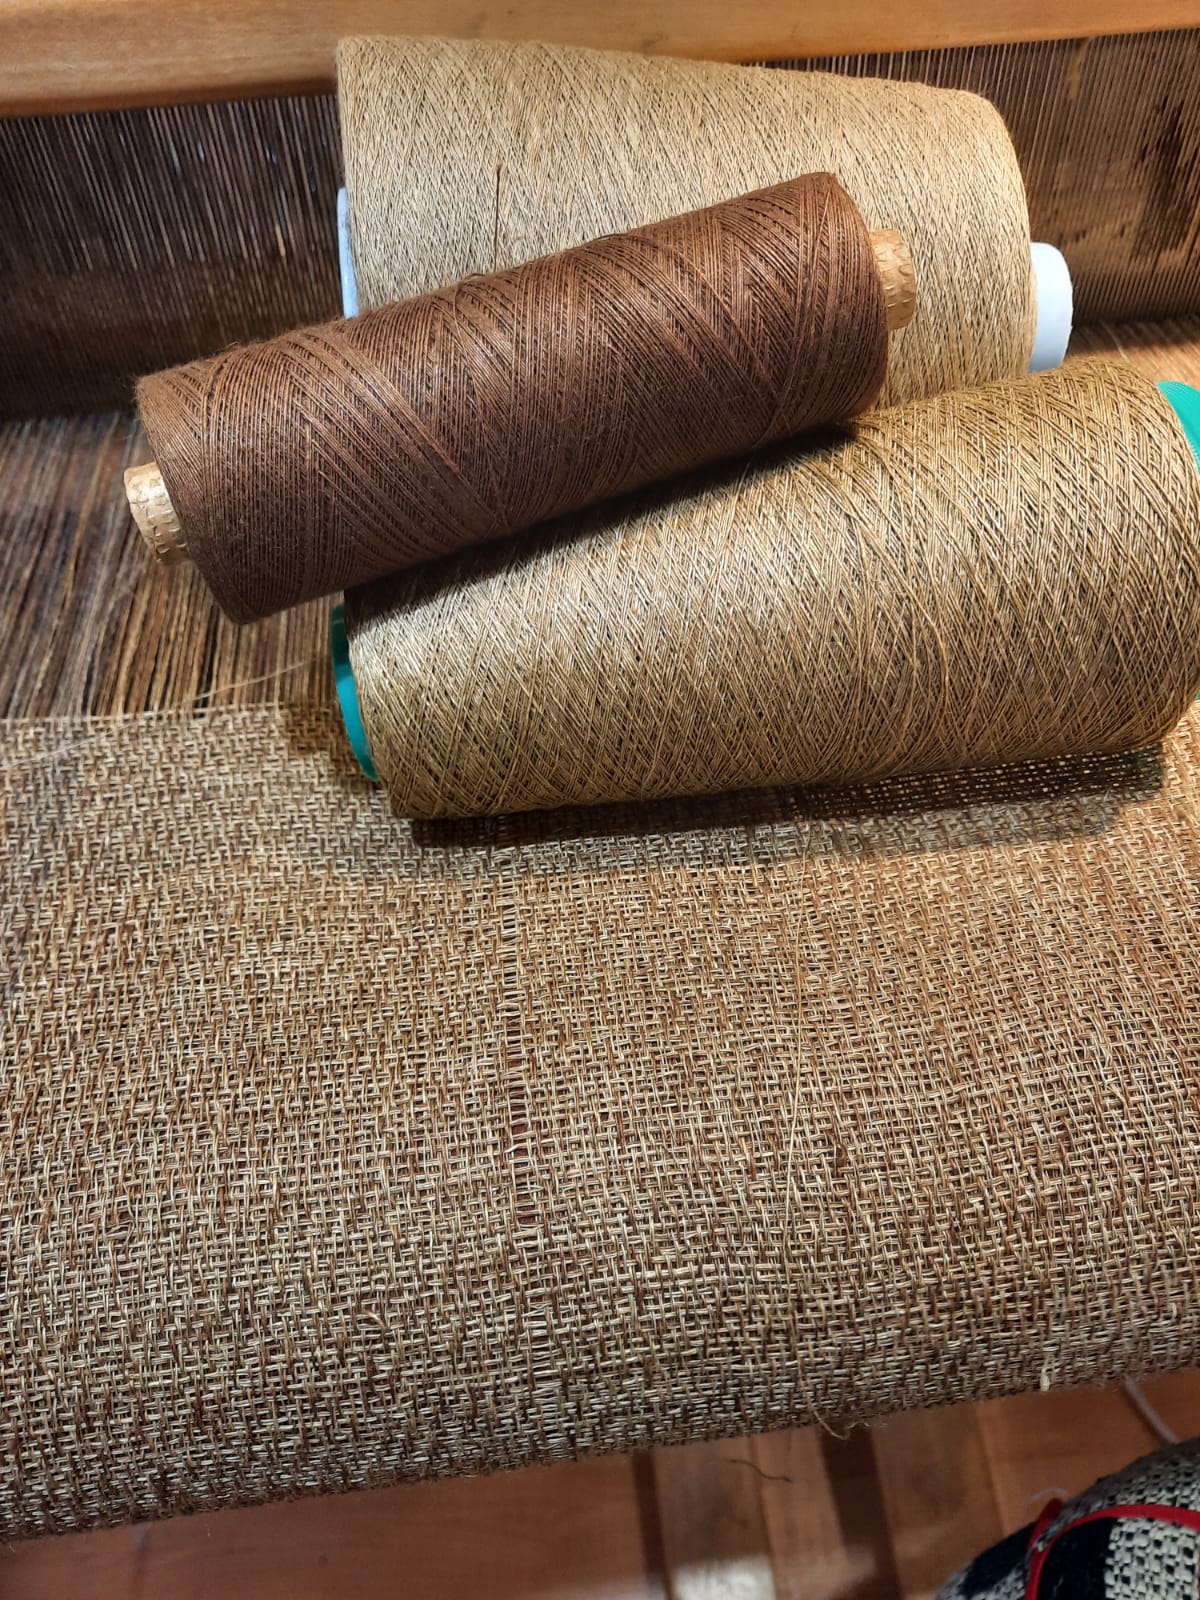 Bespoke upholstery fabric with reels of thread